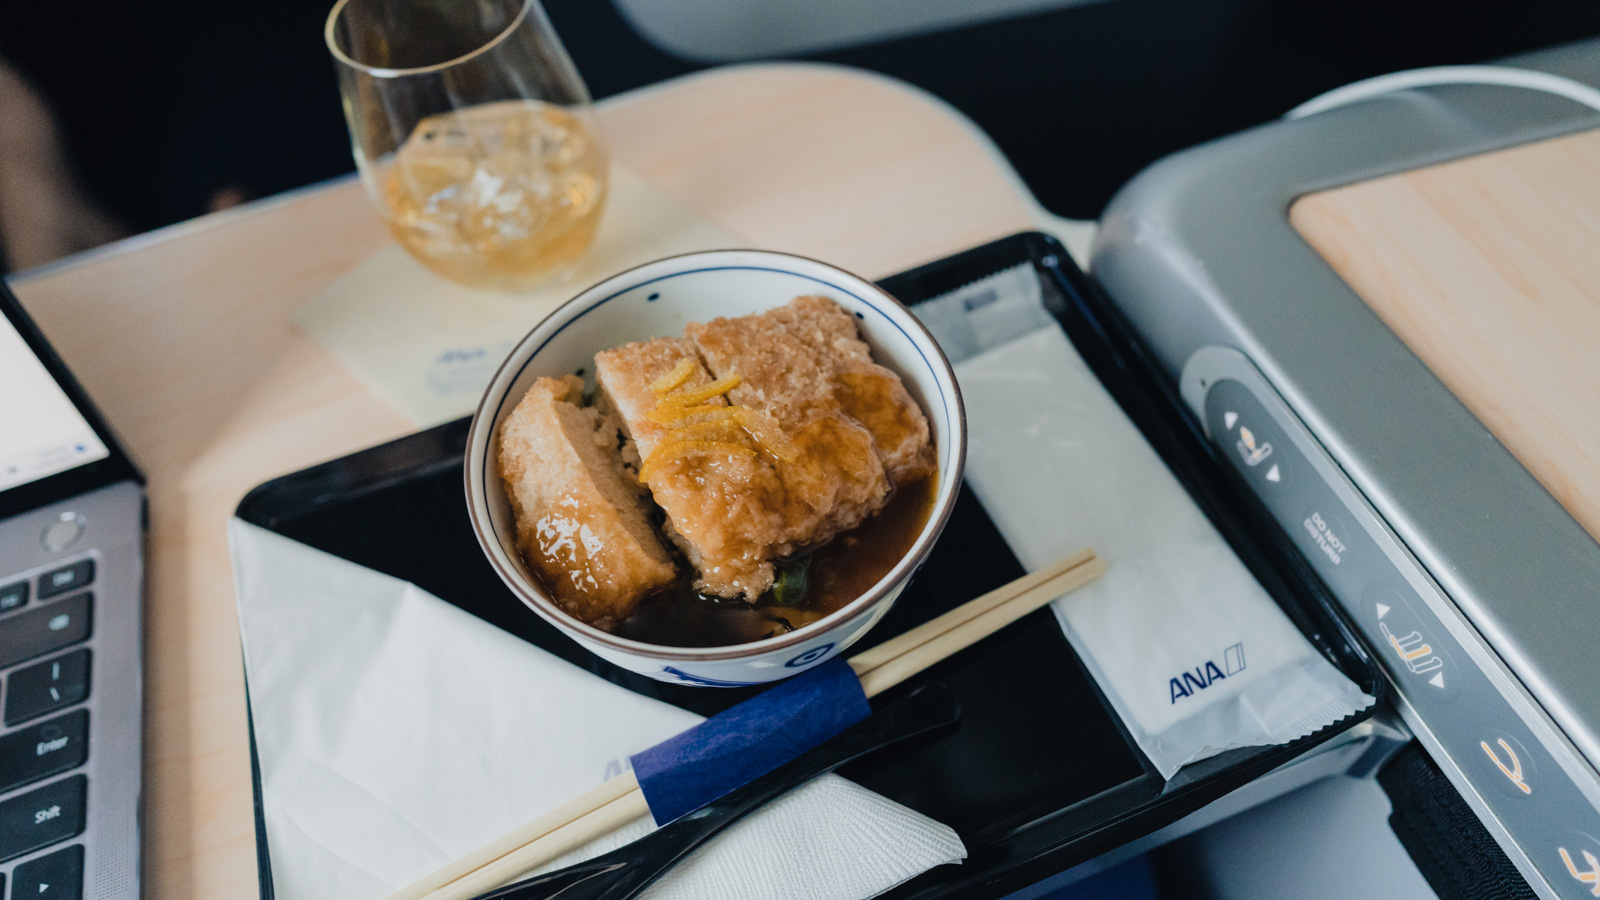 ANA Boeing 787-9 Business Class rice bowl